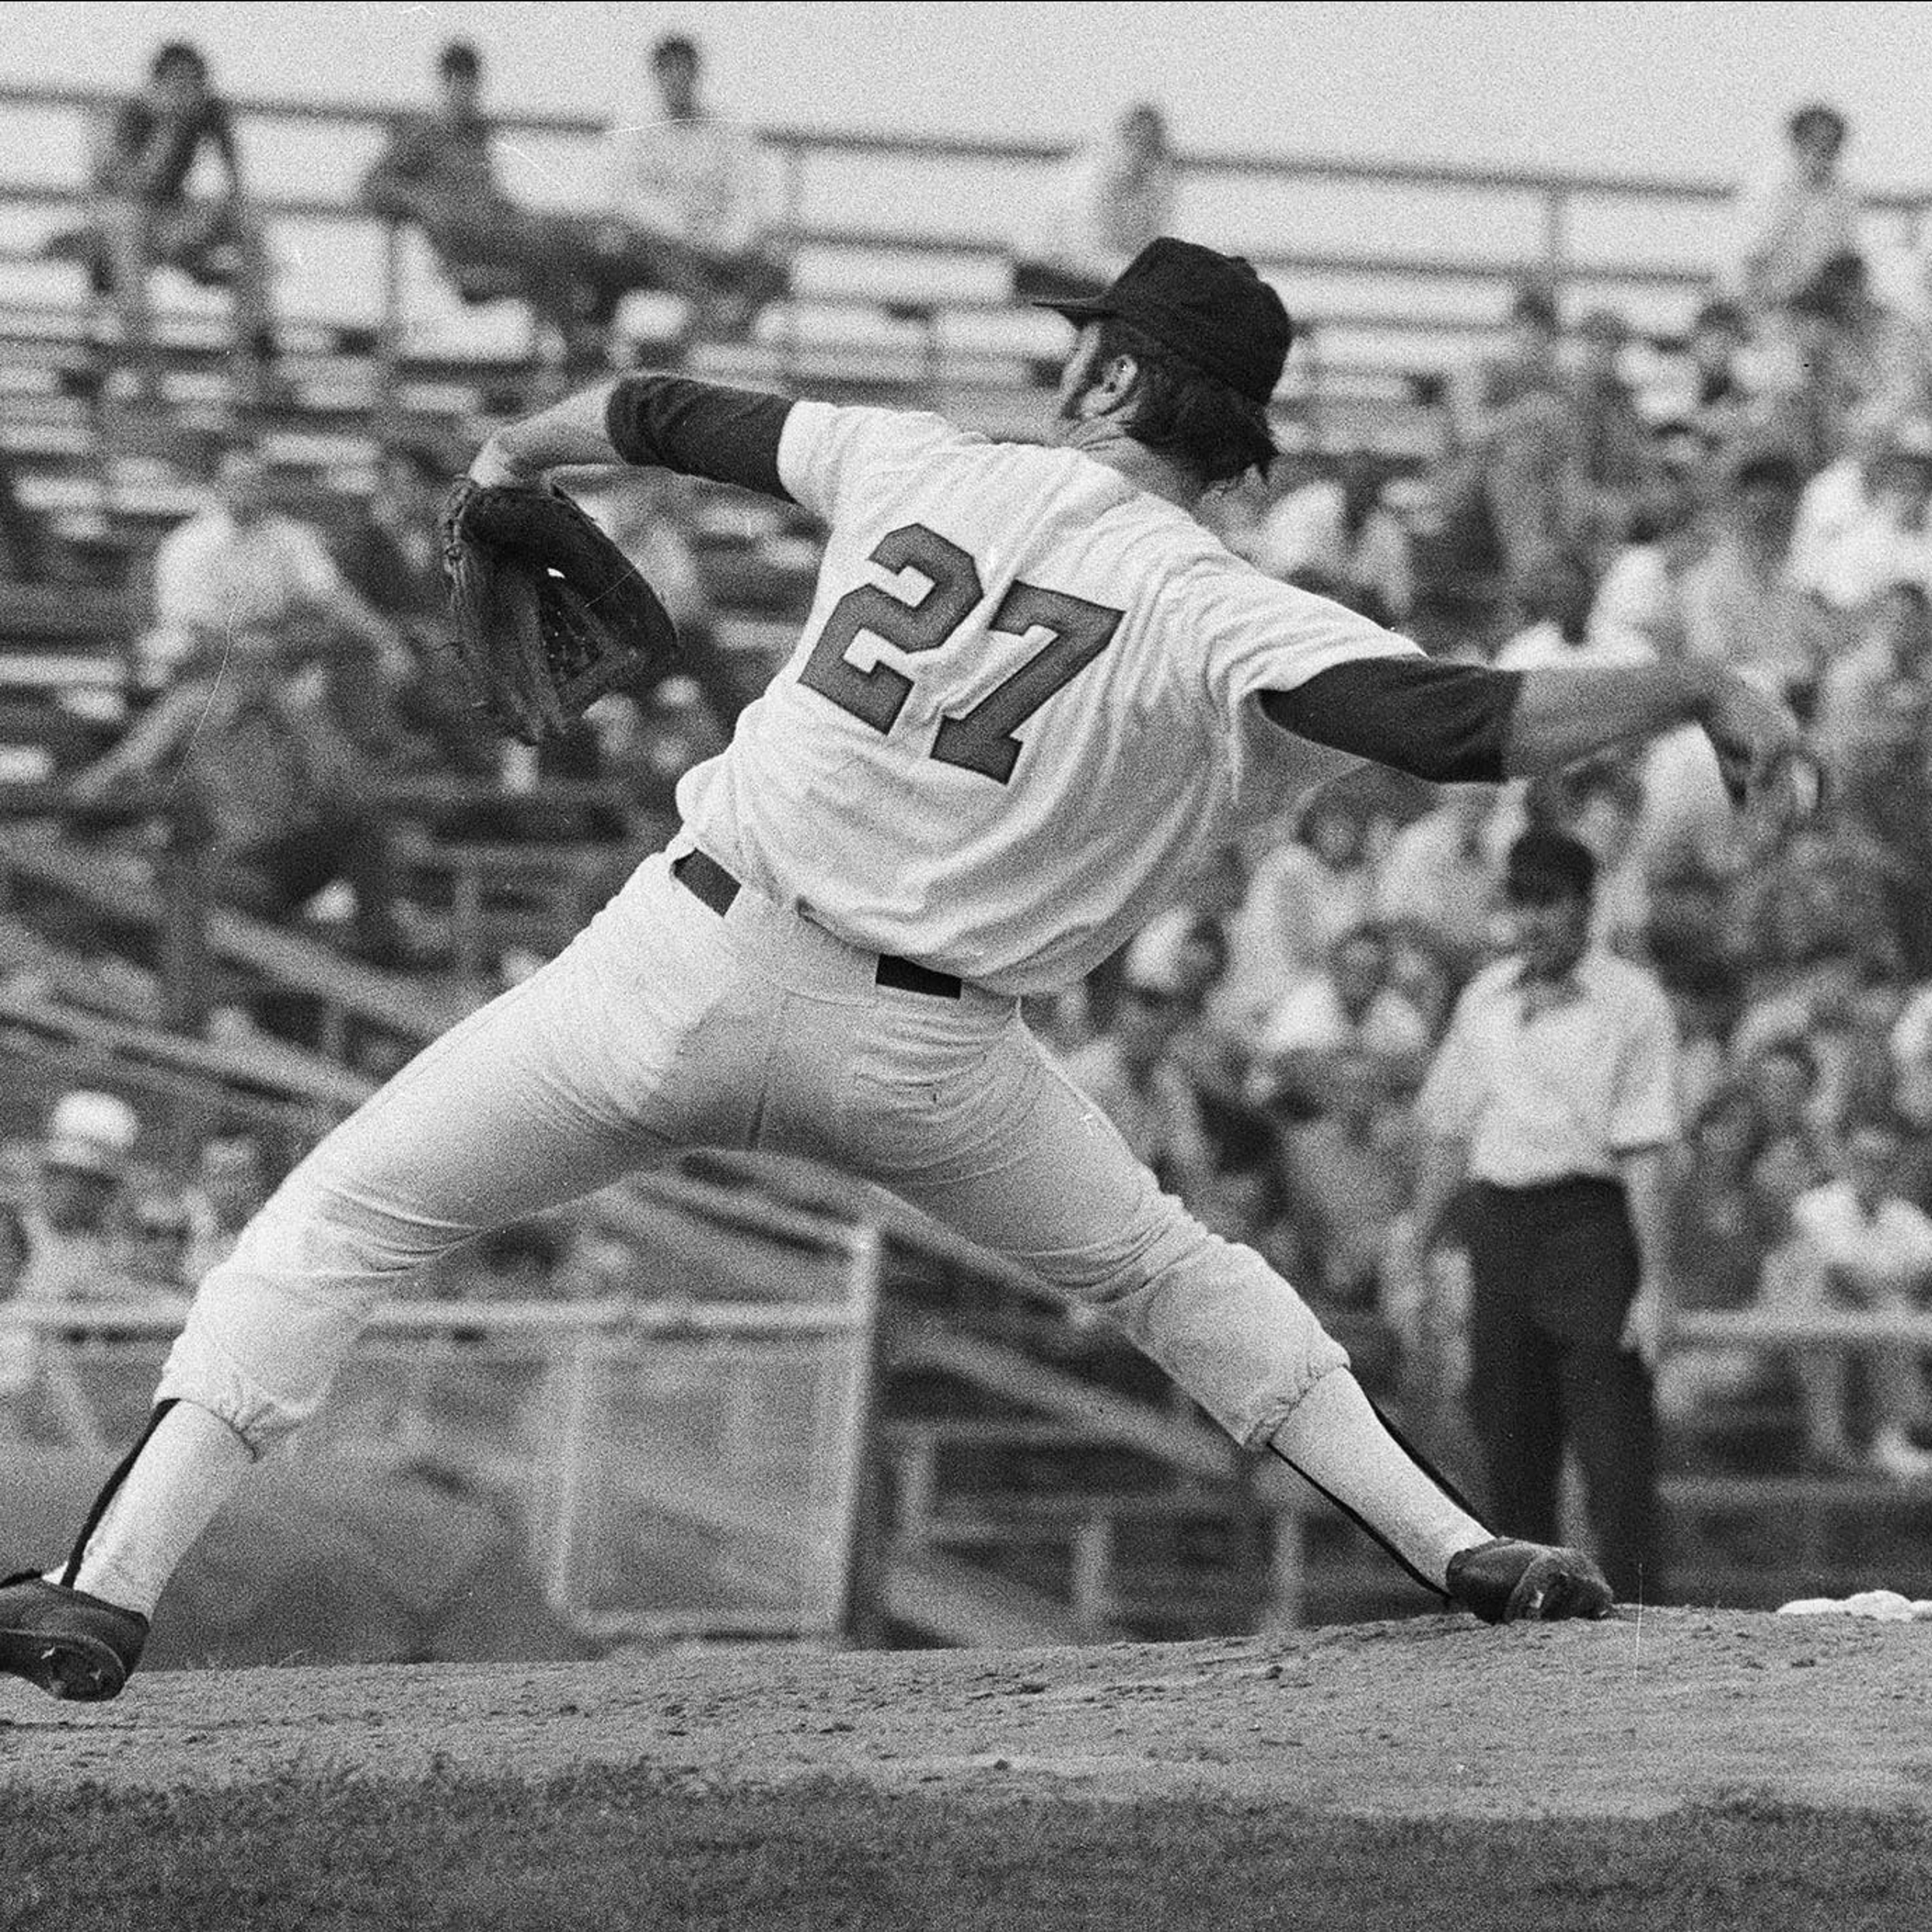 Bobby Grich's value to 1971 Rochester Red Wings can't be overstated